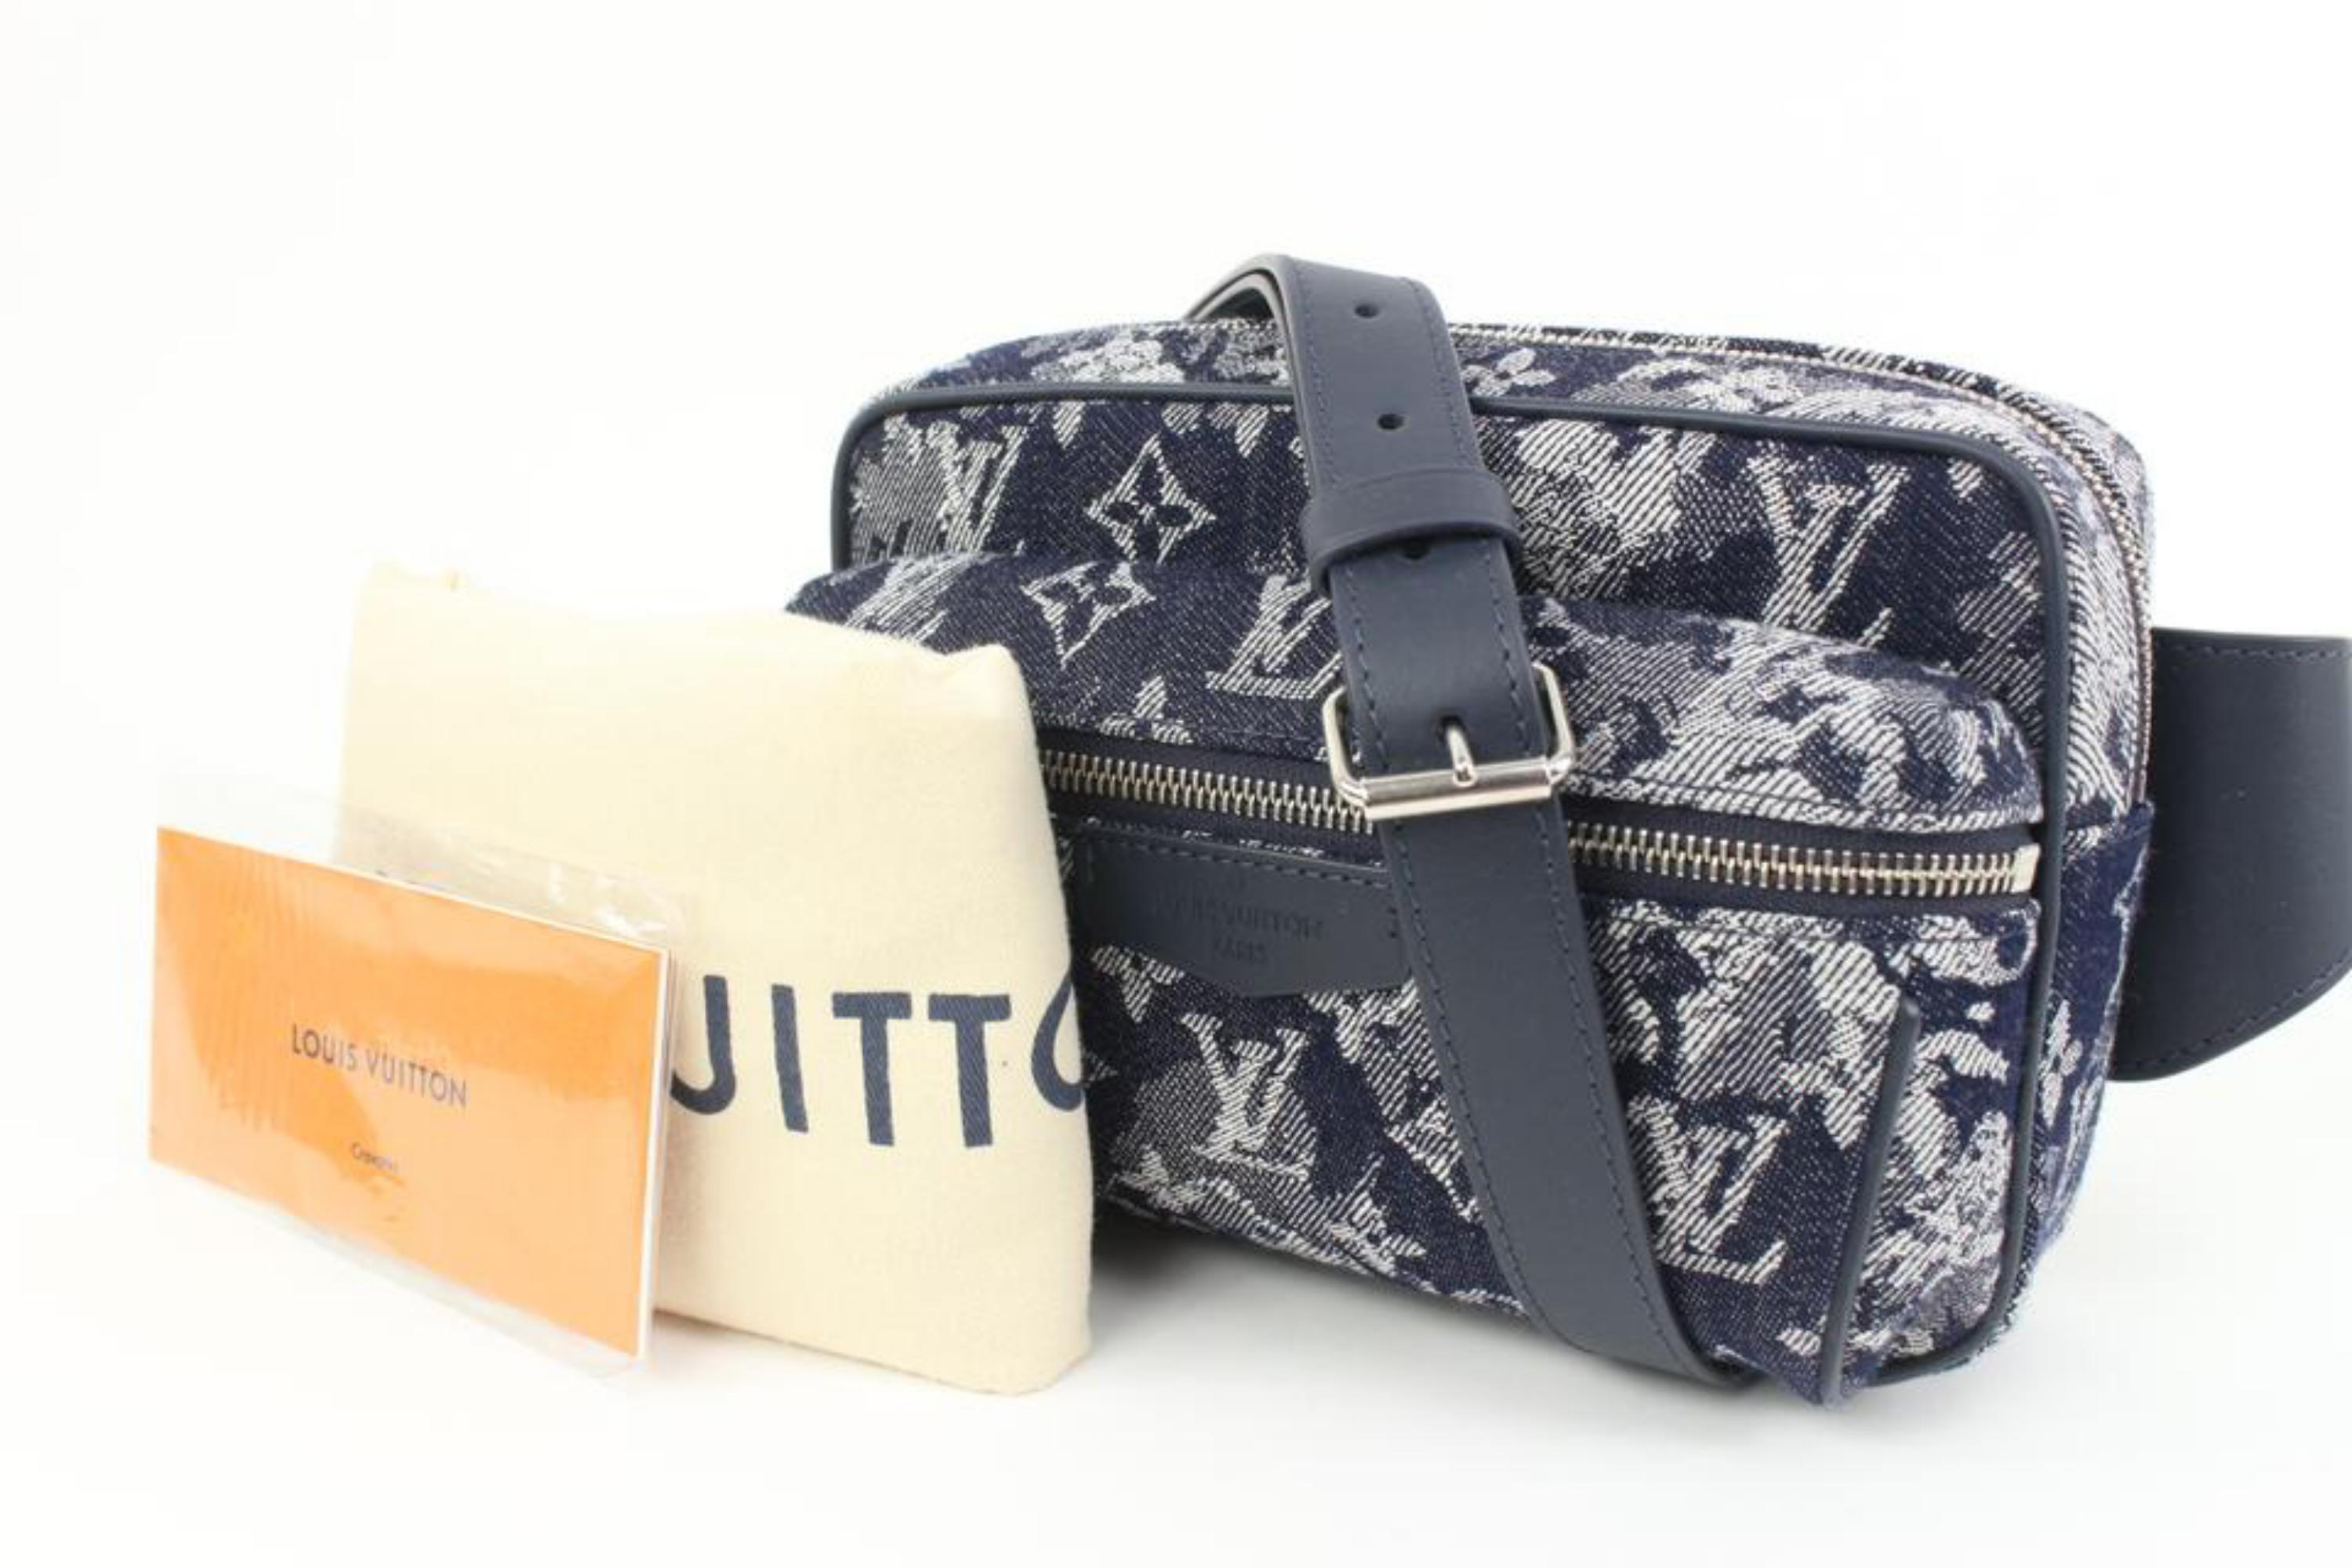 Louis Vuitton Virgil Abloh Monogram Tapestry Outdoor Bumbag 58lk322s
Date Code/Serial Number: FO4270
Made In: Italy
Measurements: Length:  8.5